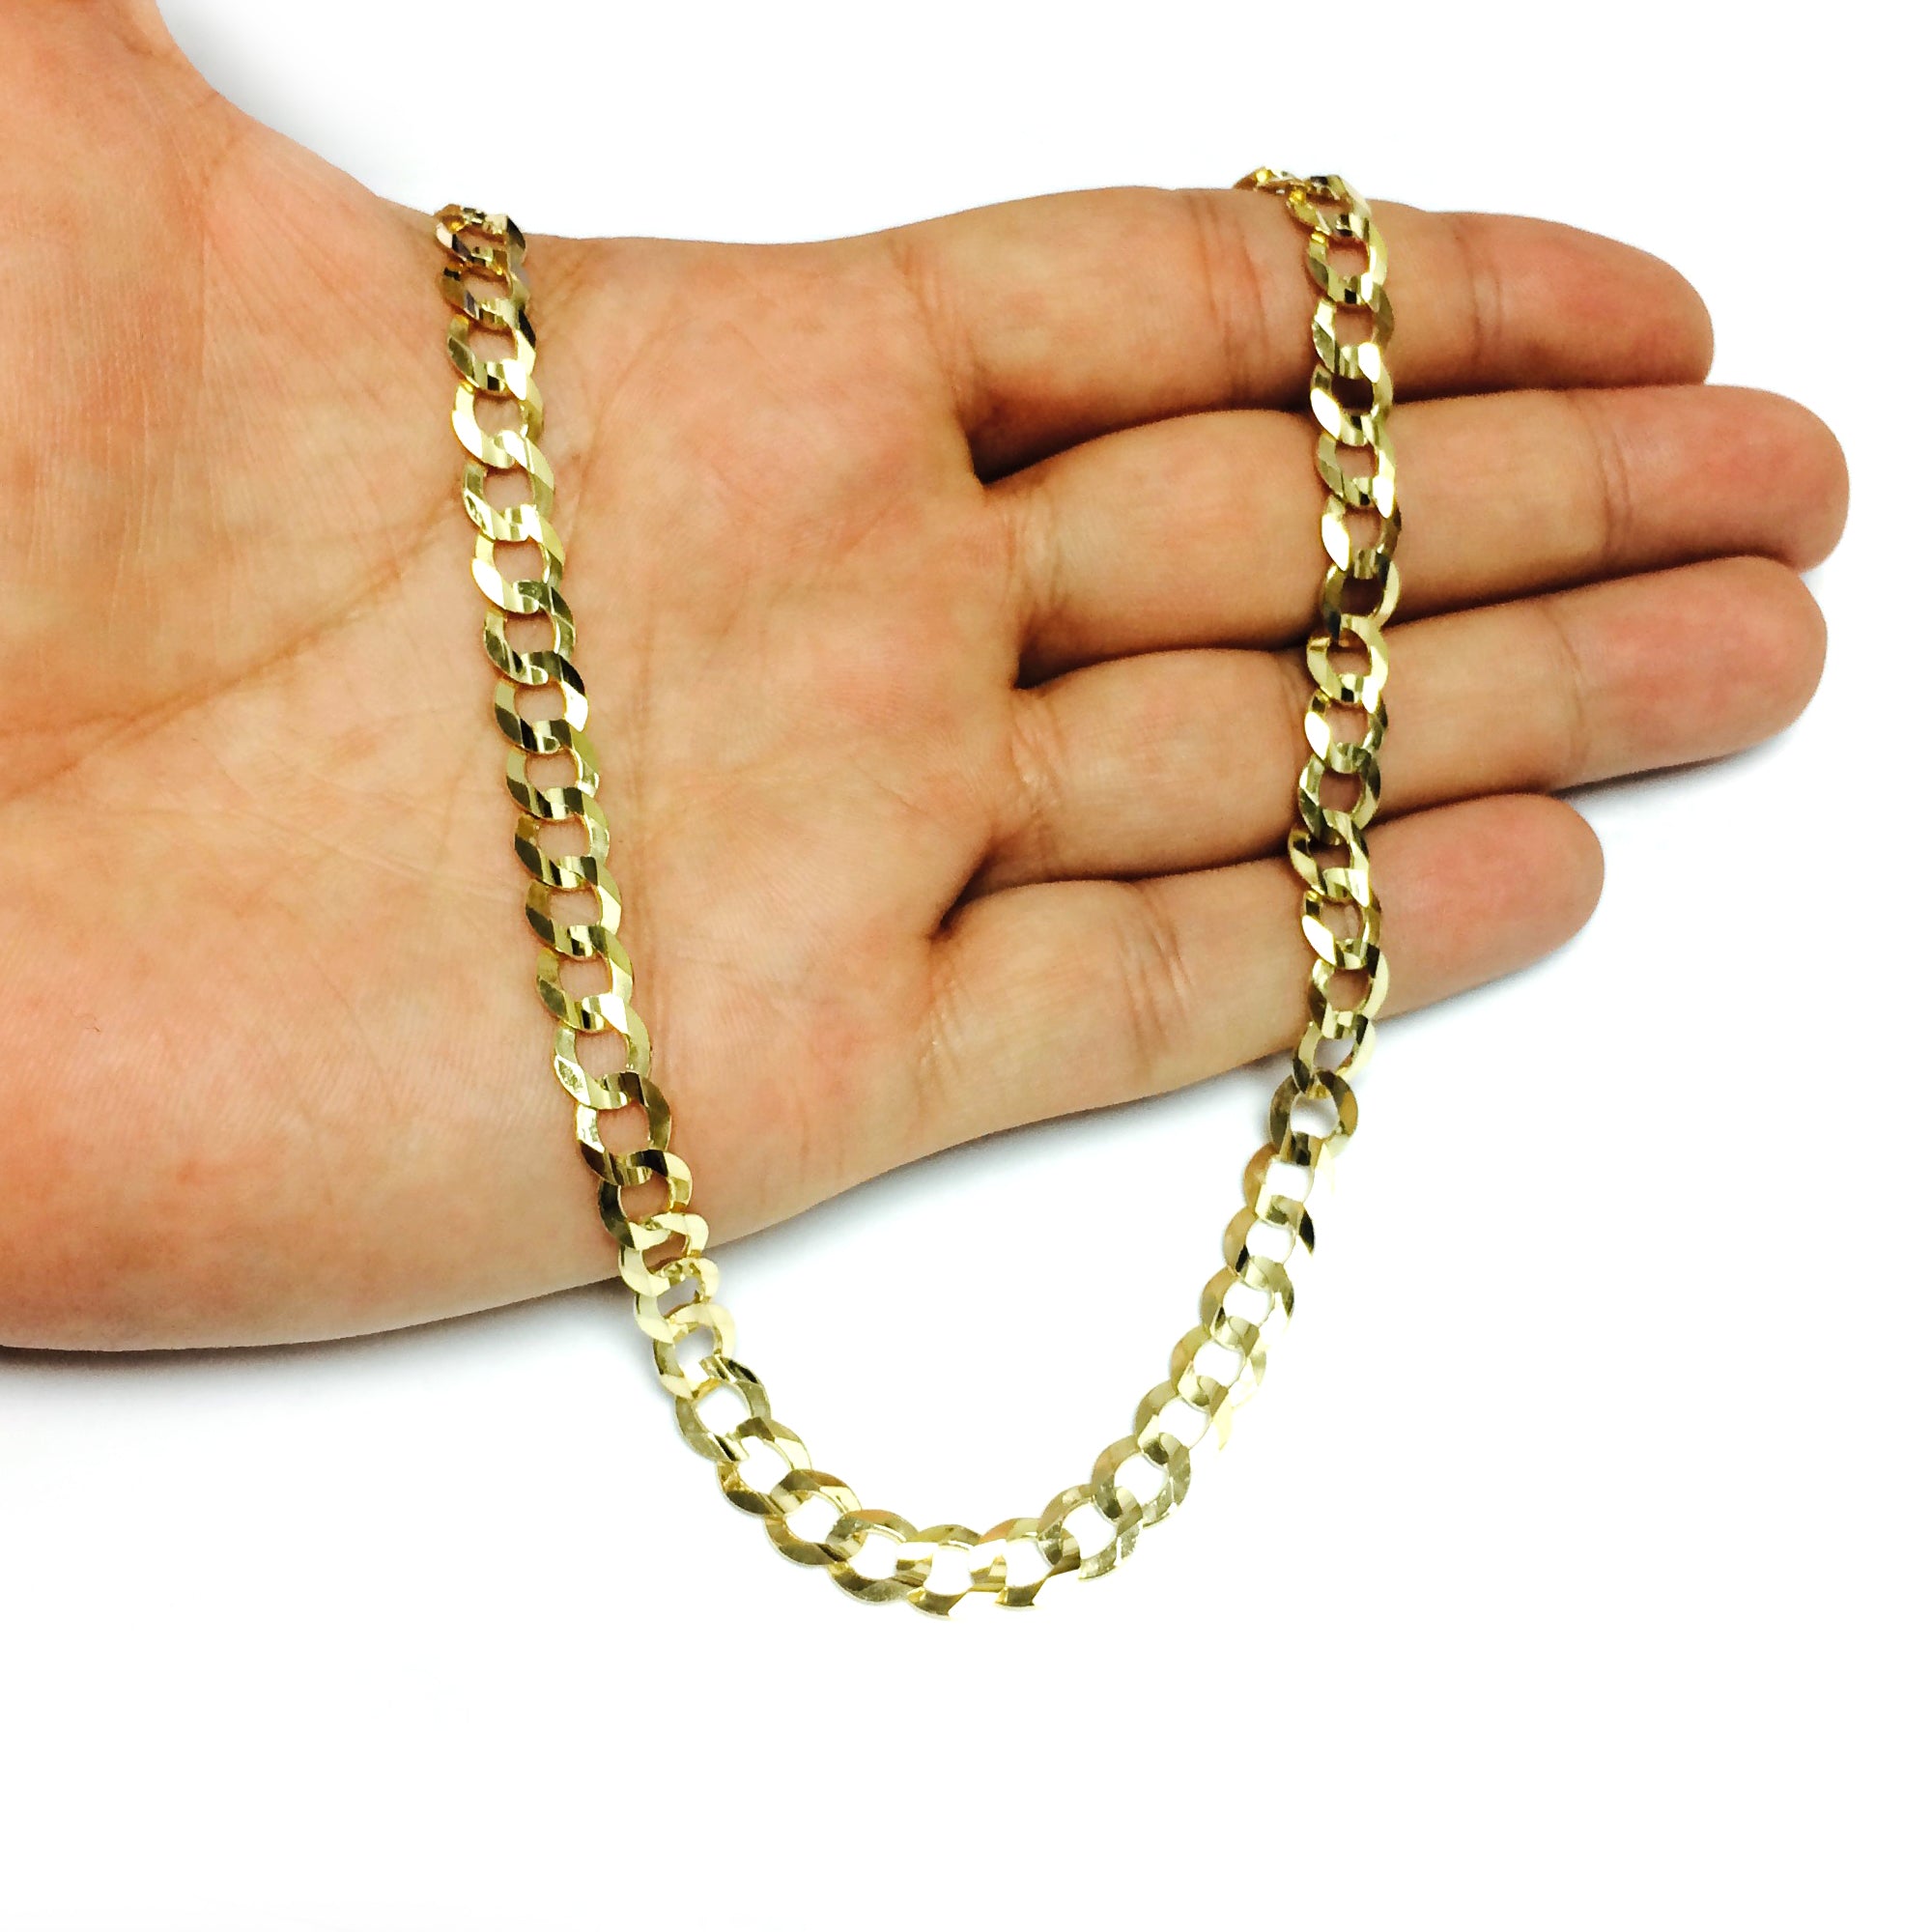 10k Yellow Gold Comfort Curb Chain Necklace, 7.0mm